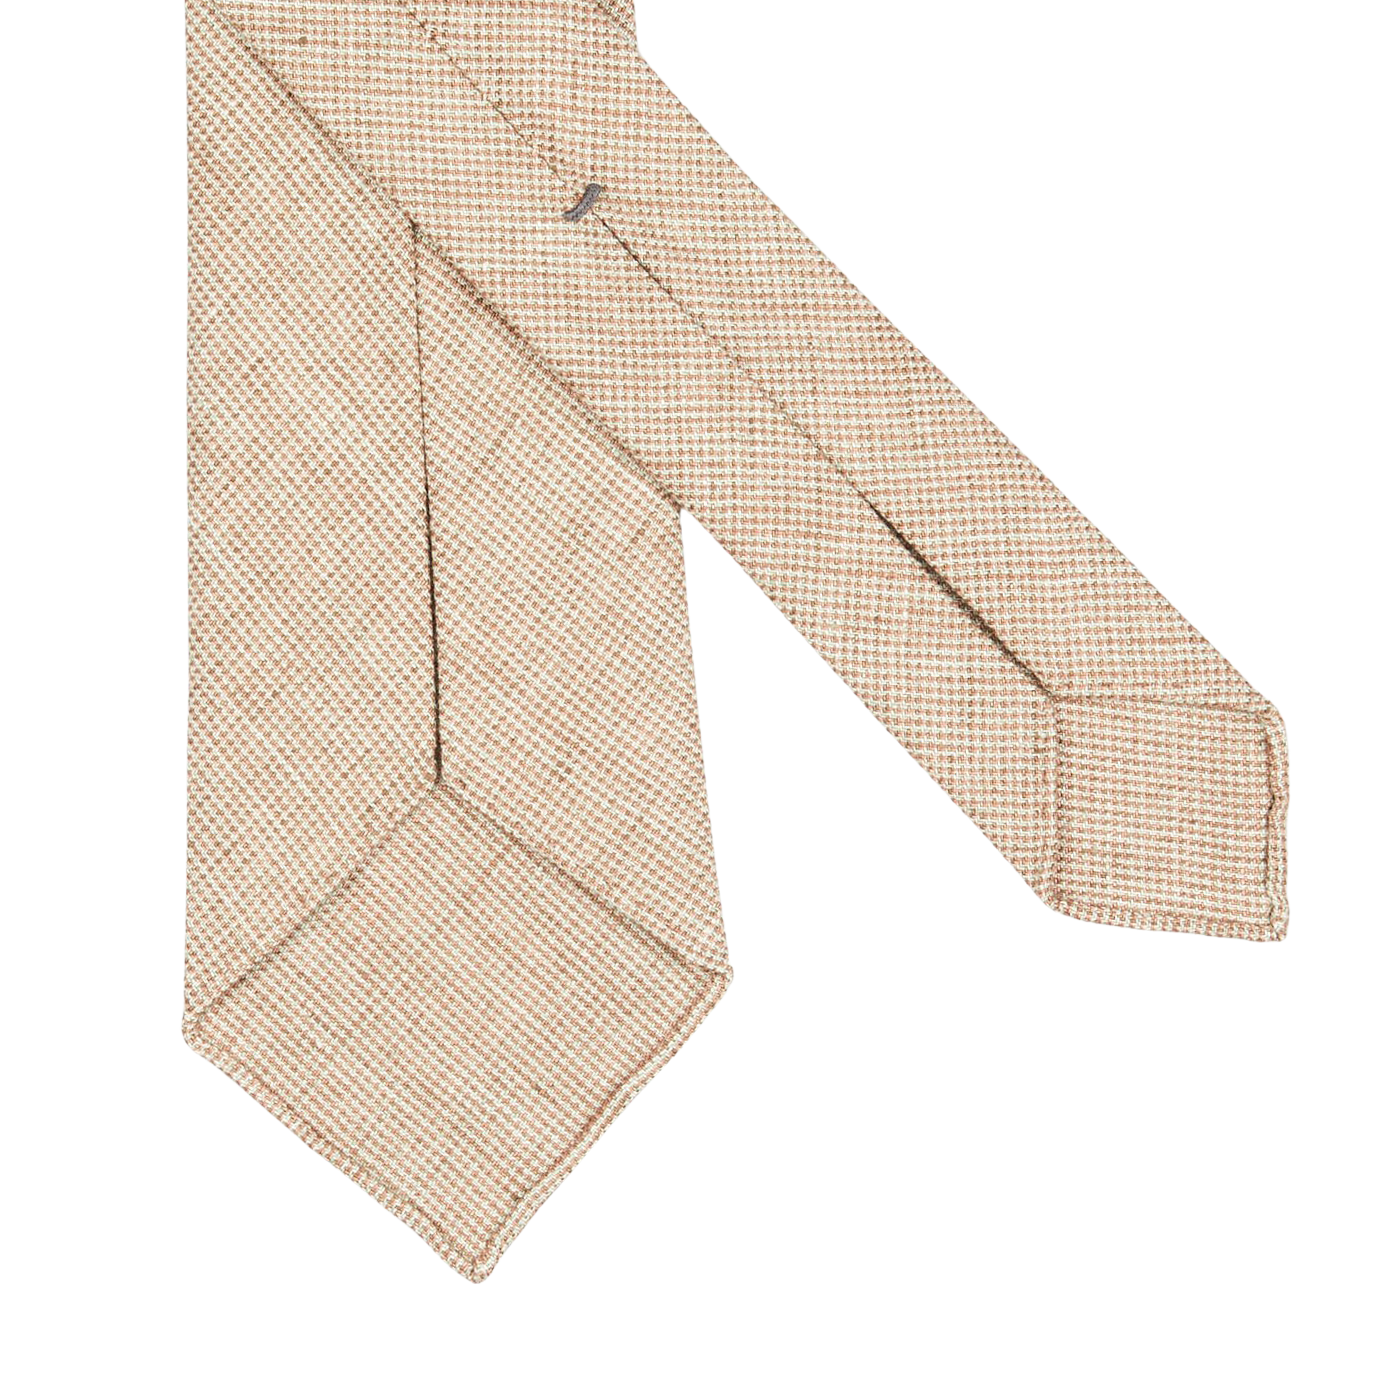 A handmade Beige Melange 7-Fold French Linen Tie made by Dreaming Of Monday, showcased against a clean white background.